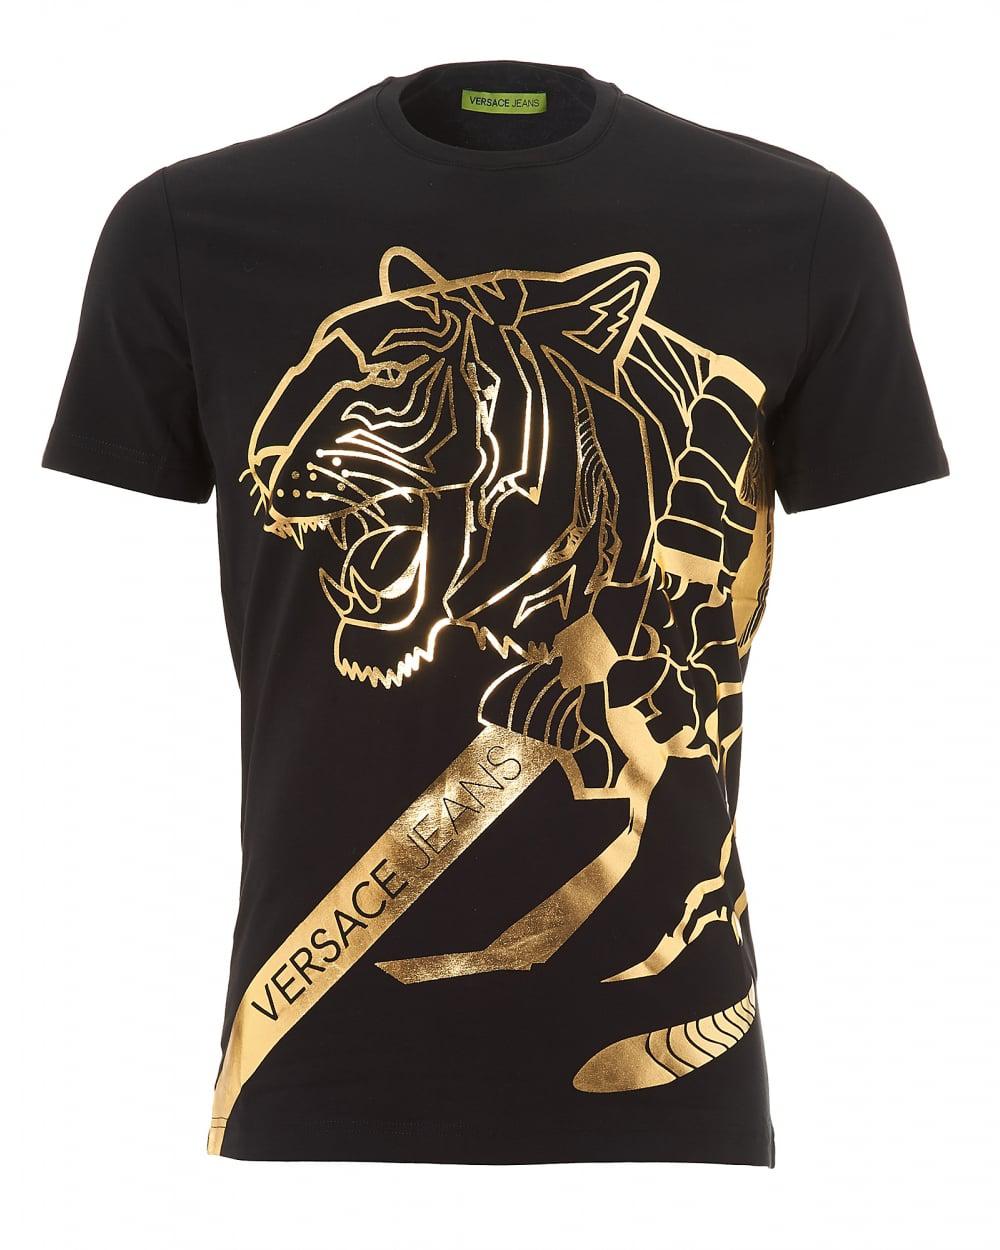 Lyst - Versace Jeans Gold Tiger Foil T-shirt, Black Slim Fit Tee in ...